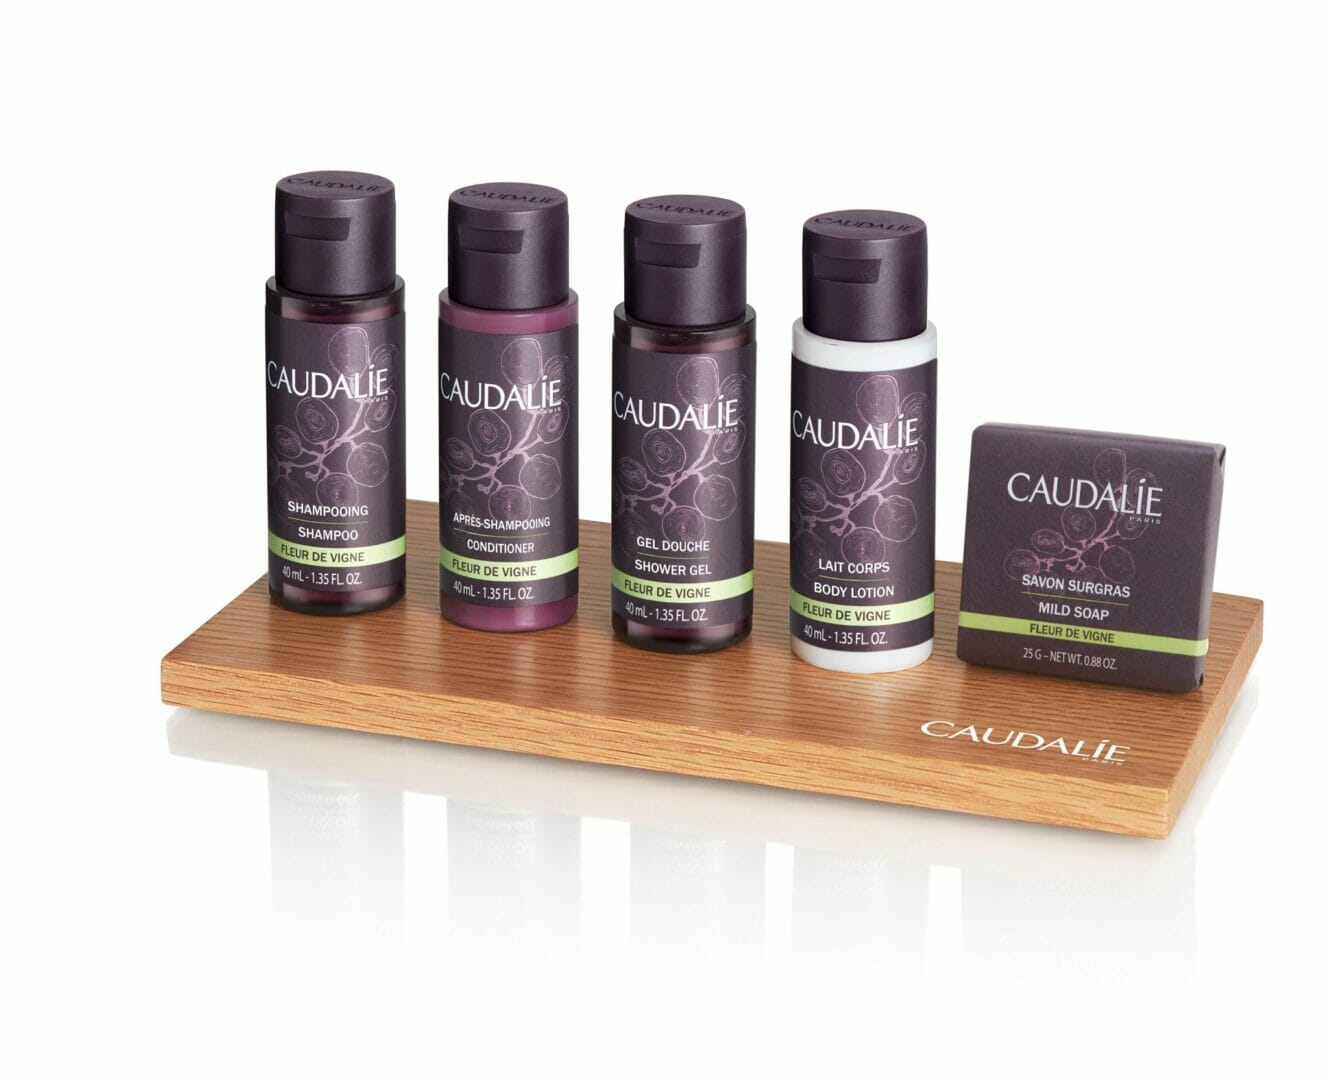 Groupe GM announces first collaboration with pioneering French skincare brand, Caudalie